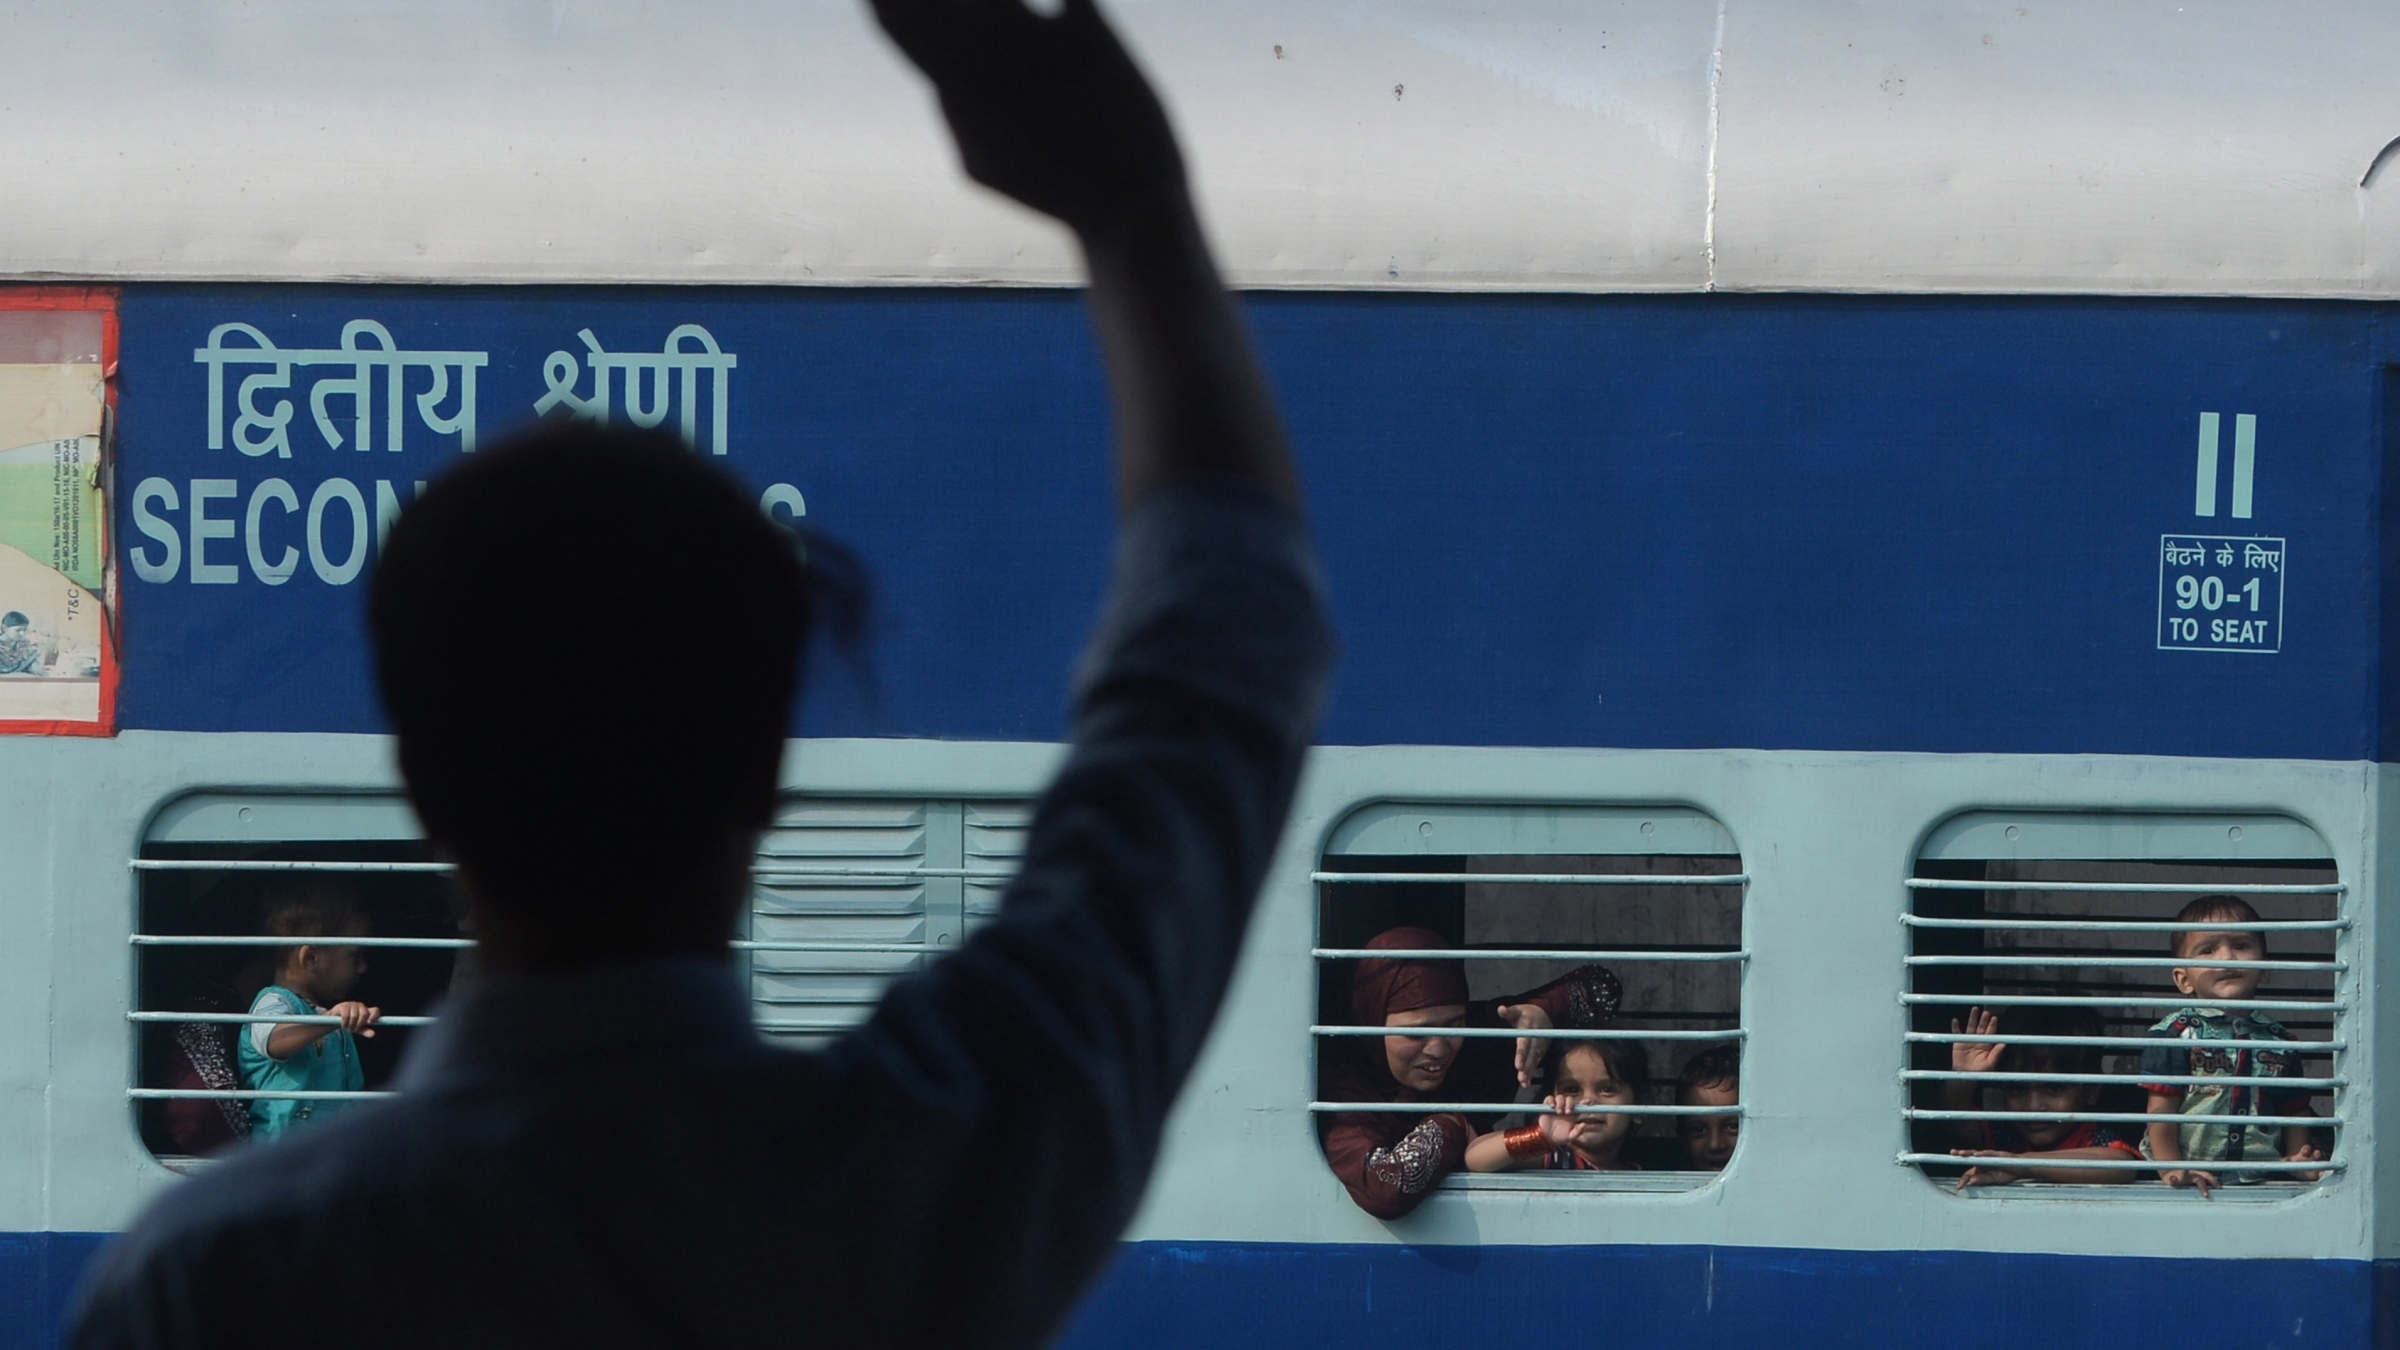 A Pakistani man waves to his Indian Muslim relatives on their departure to India via the Samjhauta Express train, also called the Friendship Express that ran between Delhi and Attari in India and Lahore in Pakistan, at the railway station in Lahore on August 8, 2019. Service was suspended in August 2019 amid worsening diplomatic tensions after India revoked the special status of the state of Jammu and Kashmir.